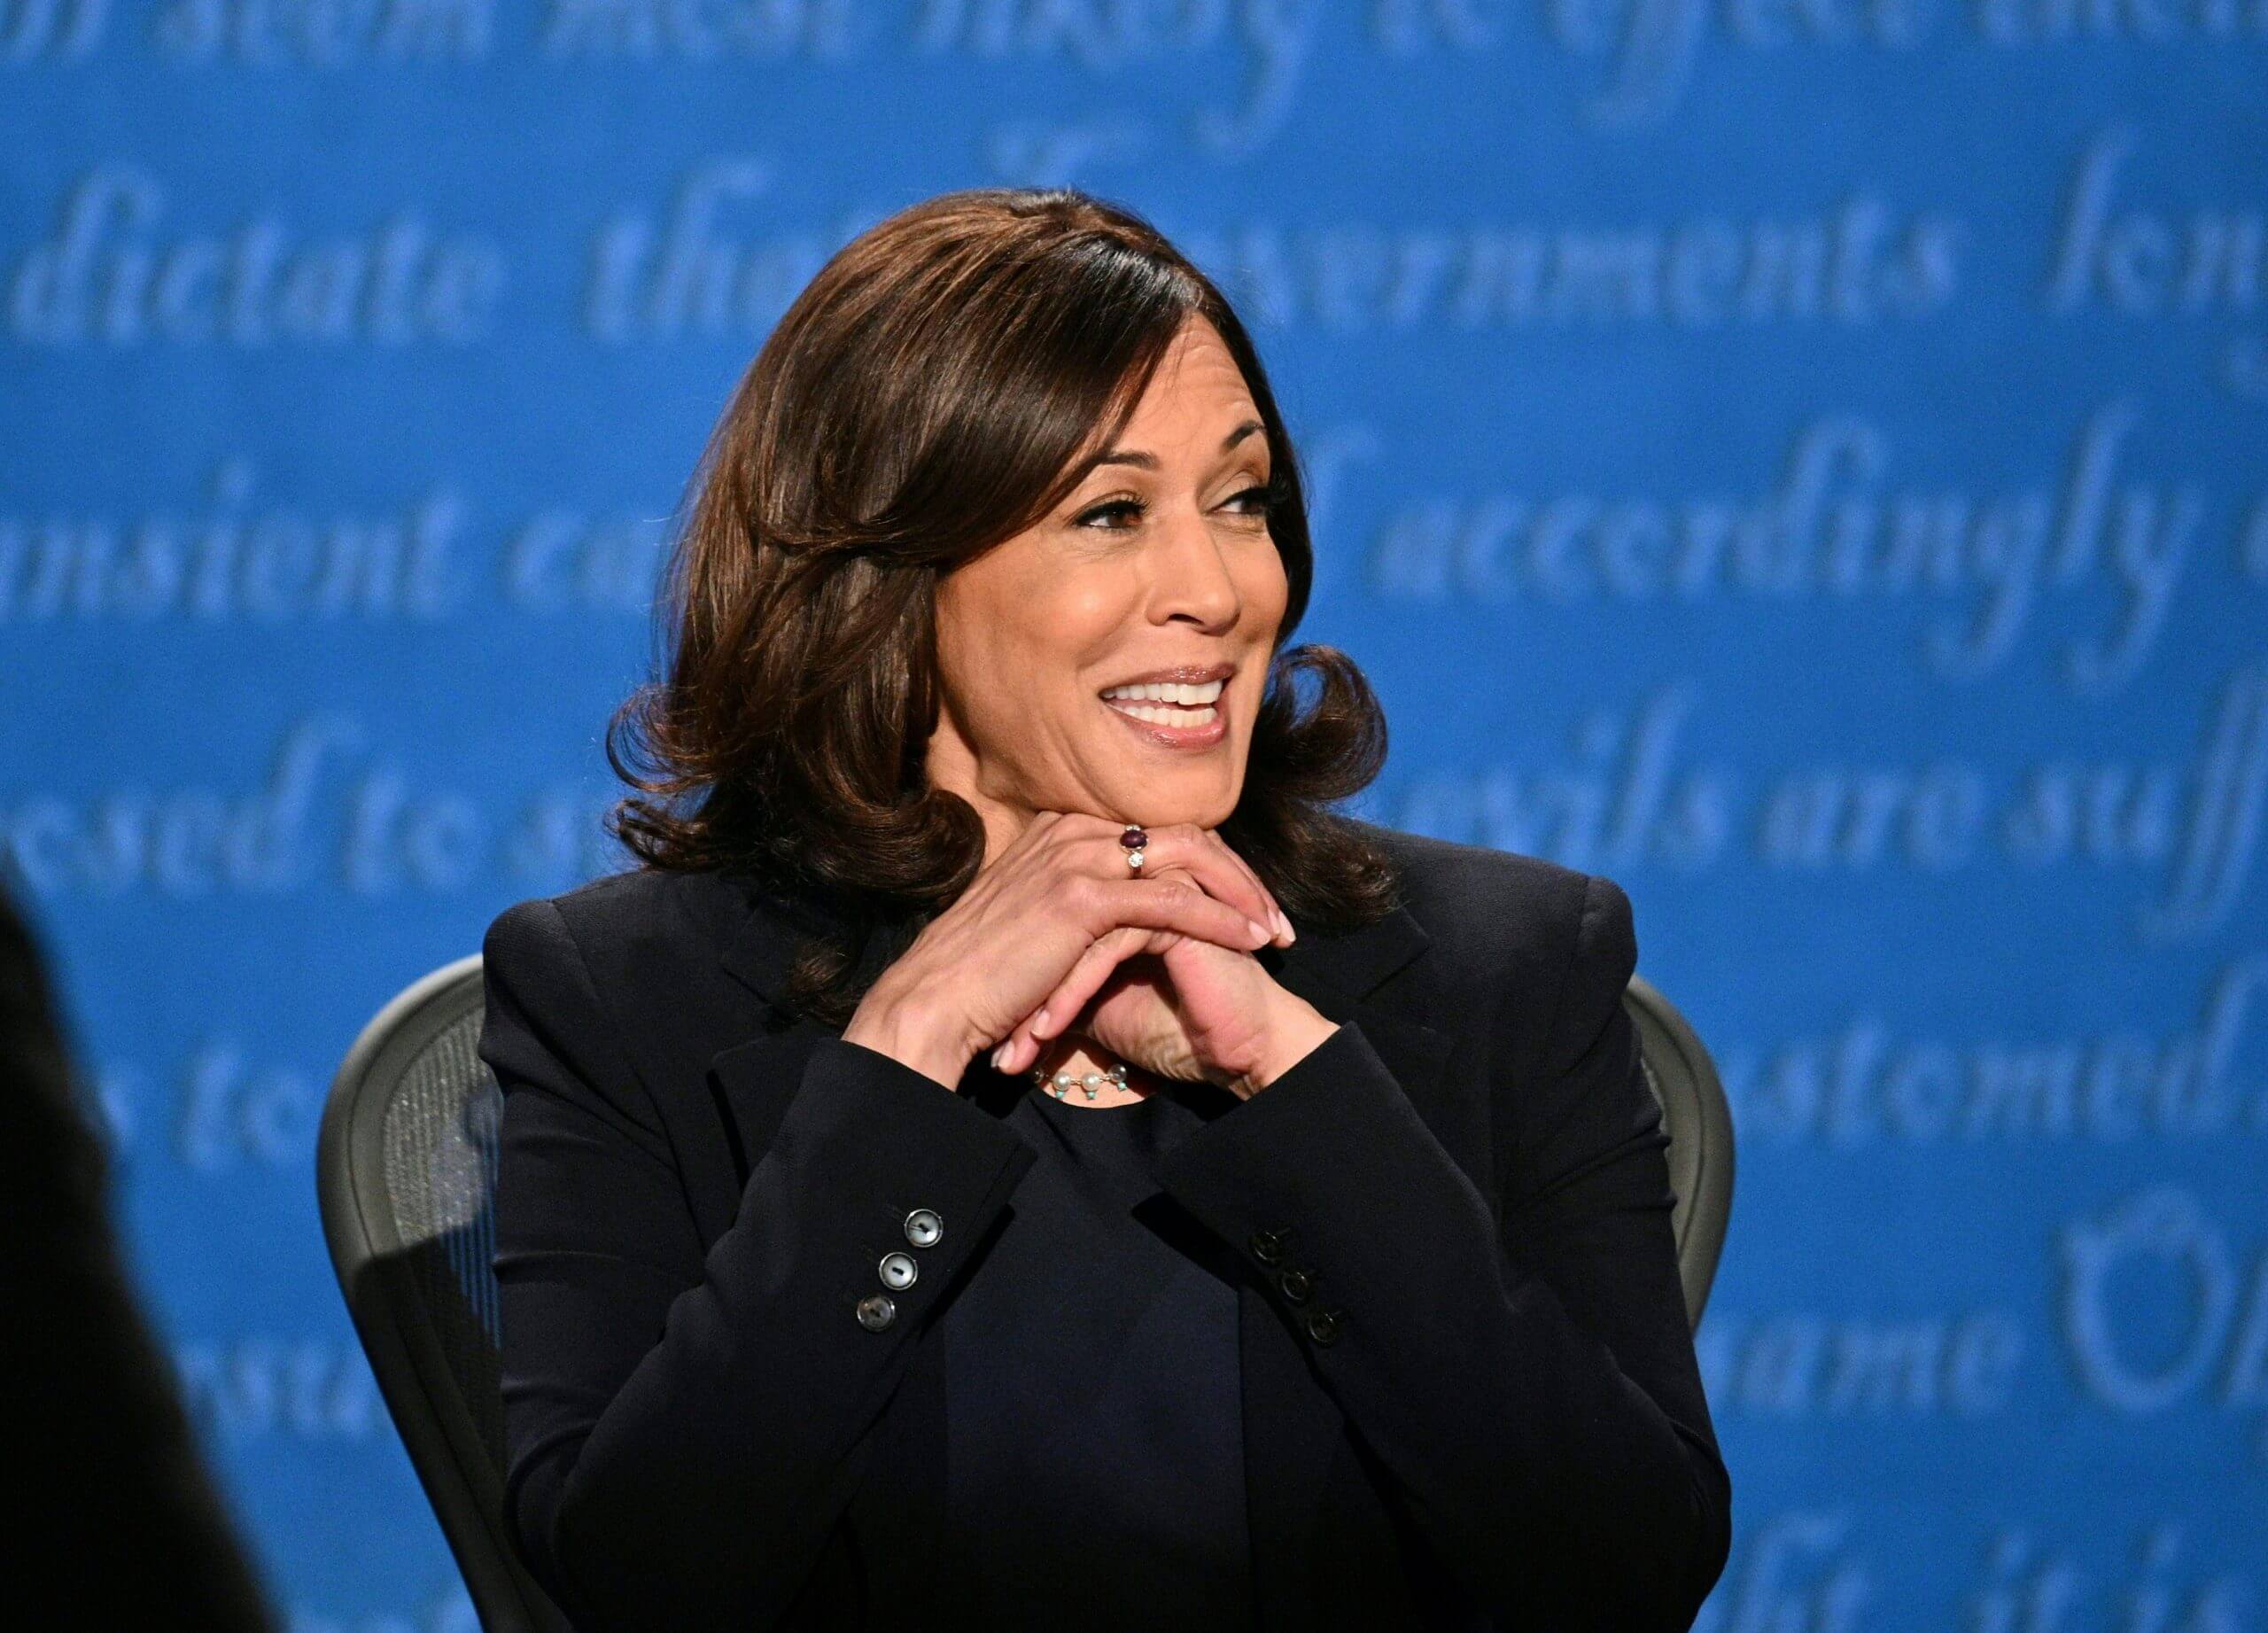 VP Debate Wrap Up: Kamala Harris Showed The World What We As Women Of Colour Have To Deal With Everyday. Photo Credit: www.twitter.com